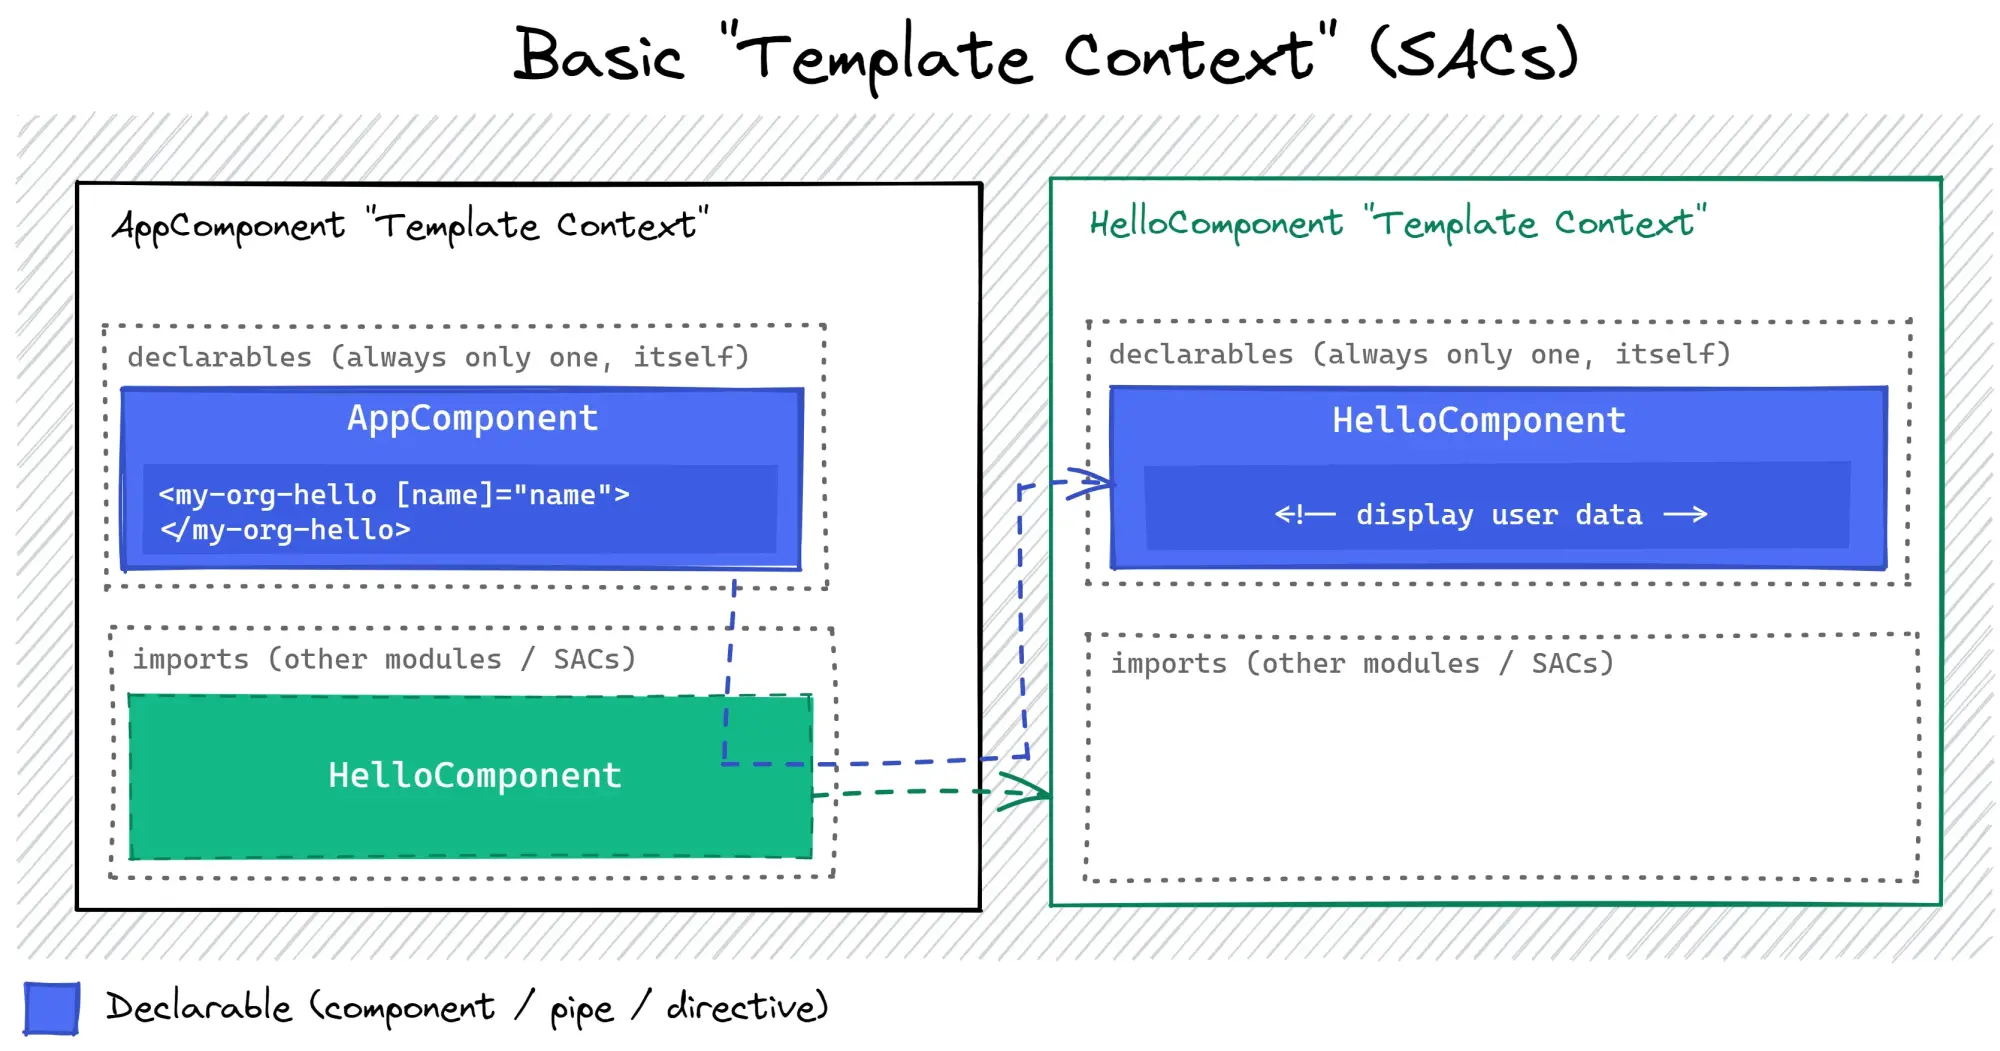 Multiple SAC based template contexts